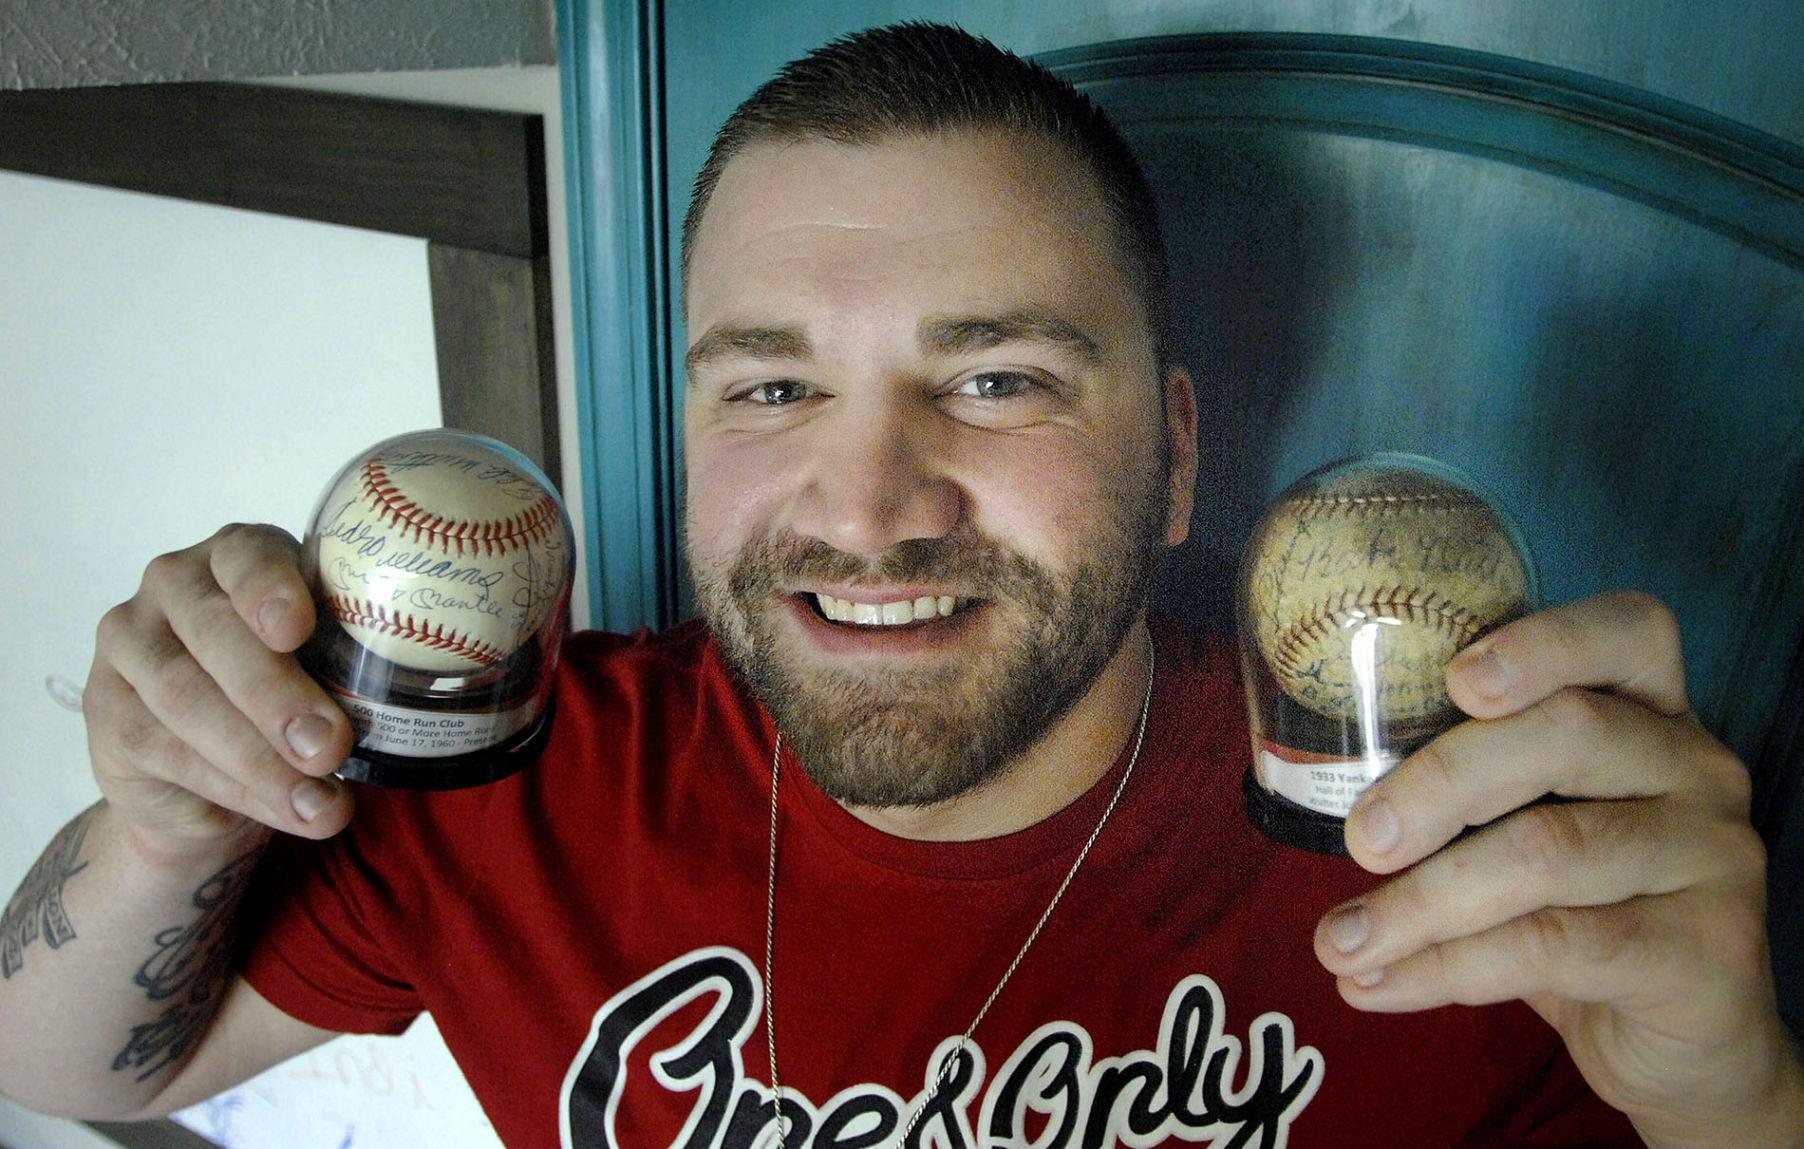 Normal collector Aaron Ahart ups his game to play in the big leagues